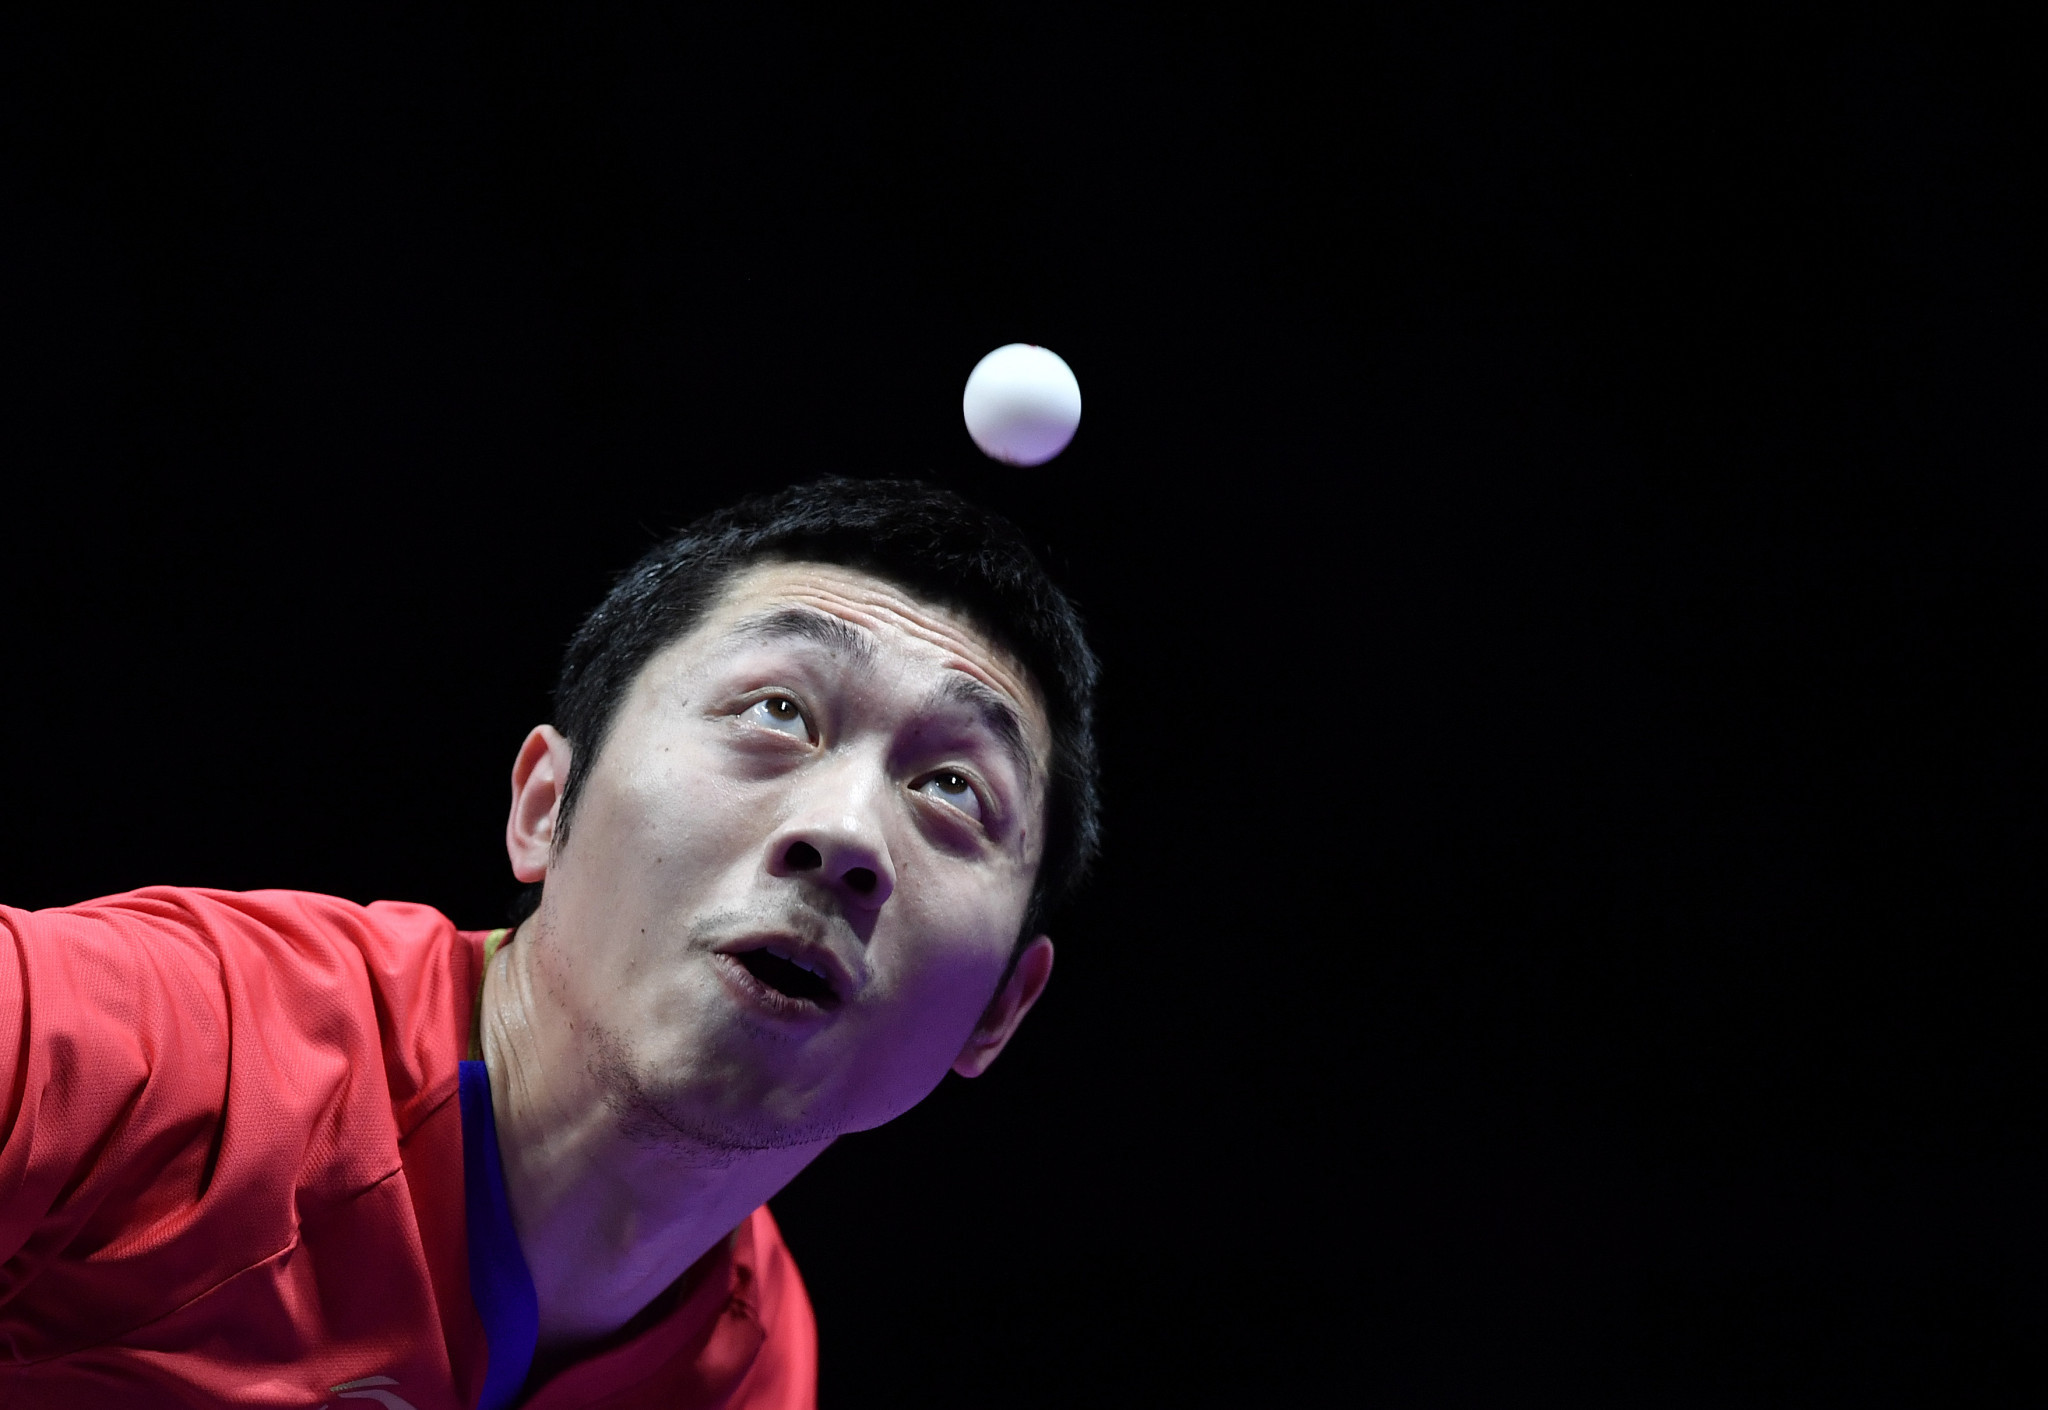 Xu clinches third consecutive victory on ITTF World Tour at Australian Open